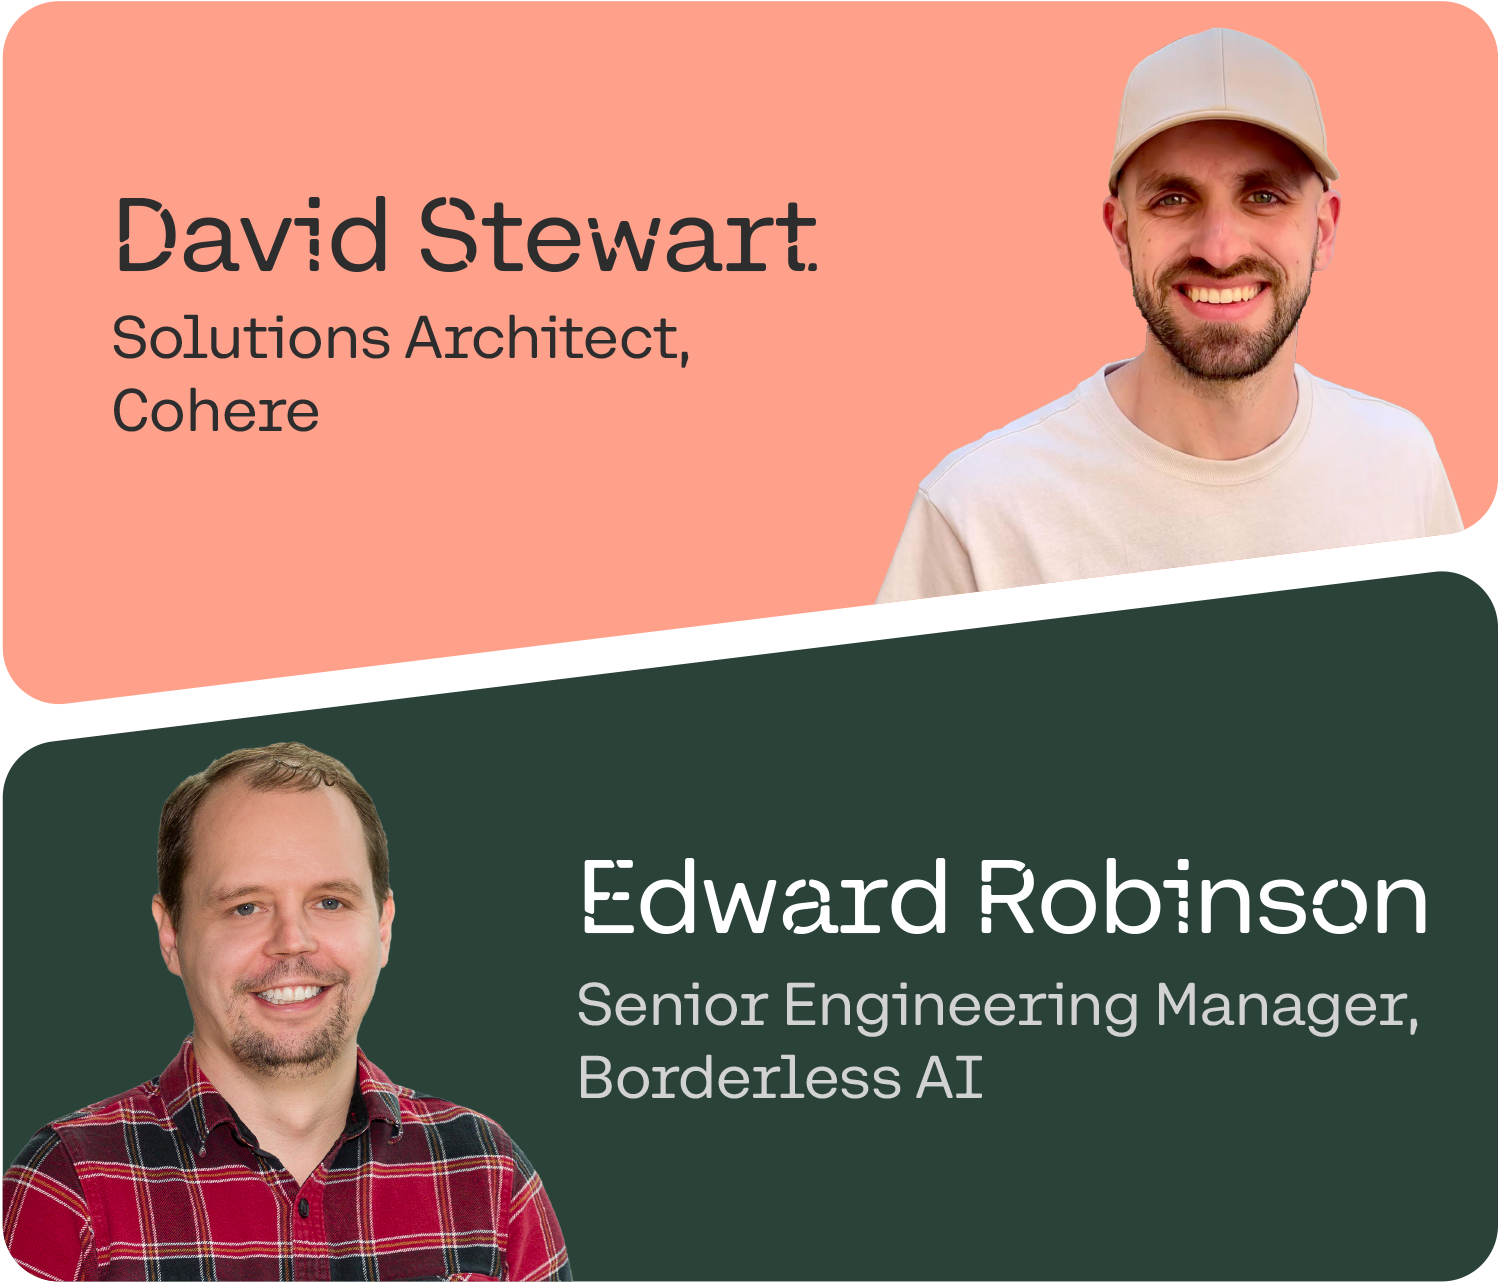 David Stewart, Solutions of Architect, Cohere and Edward Robinson, Senior Engineer Manager, Borderless